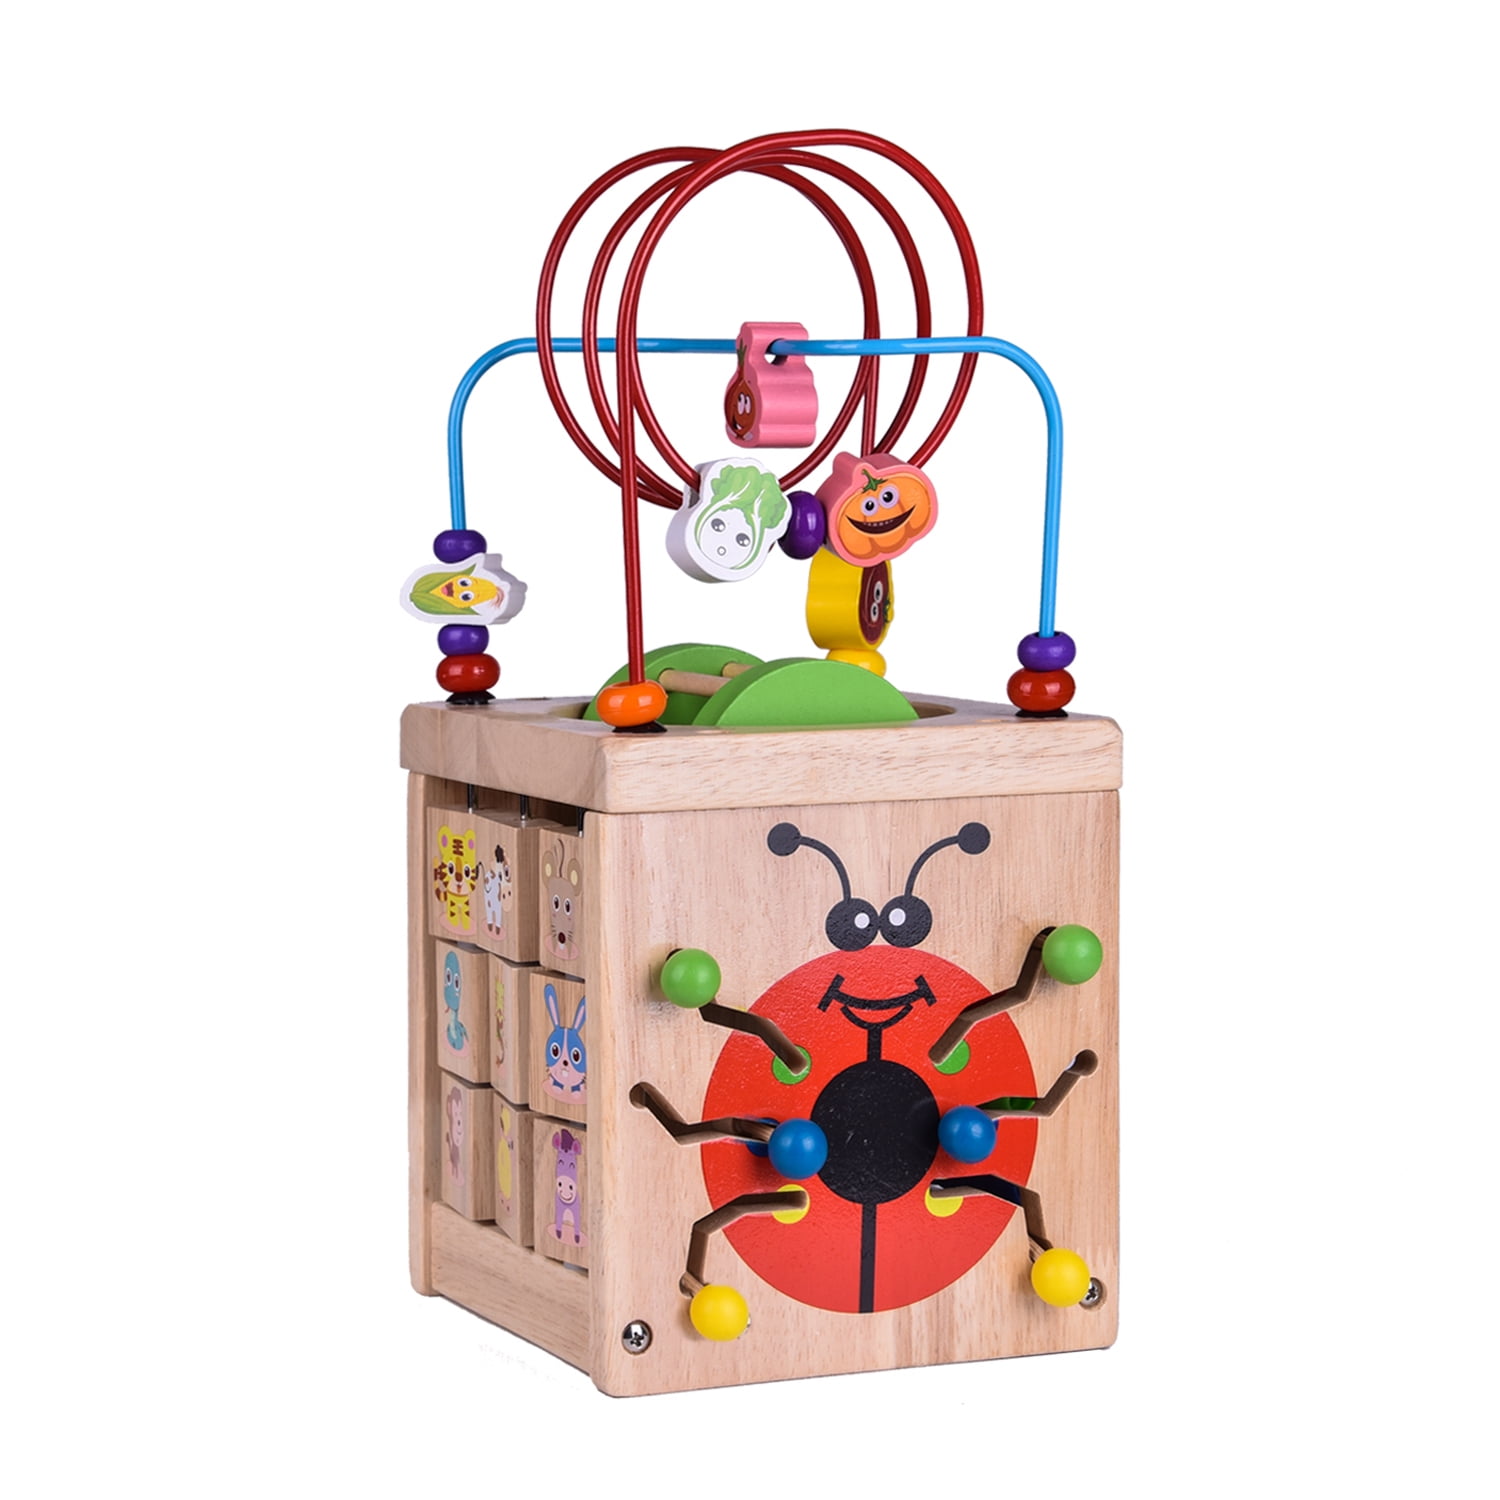 8 in 1 Wooden Activity Cube Toy Baby Bead Maze Educational Early Learning Puzzle 